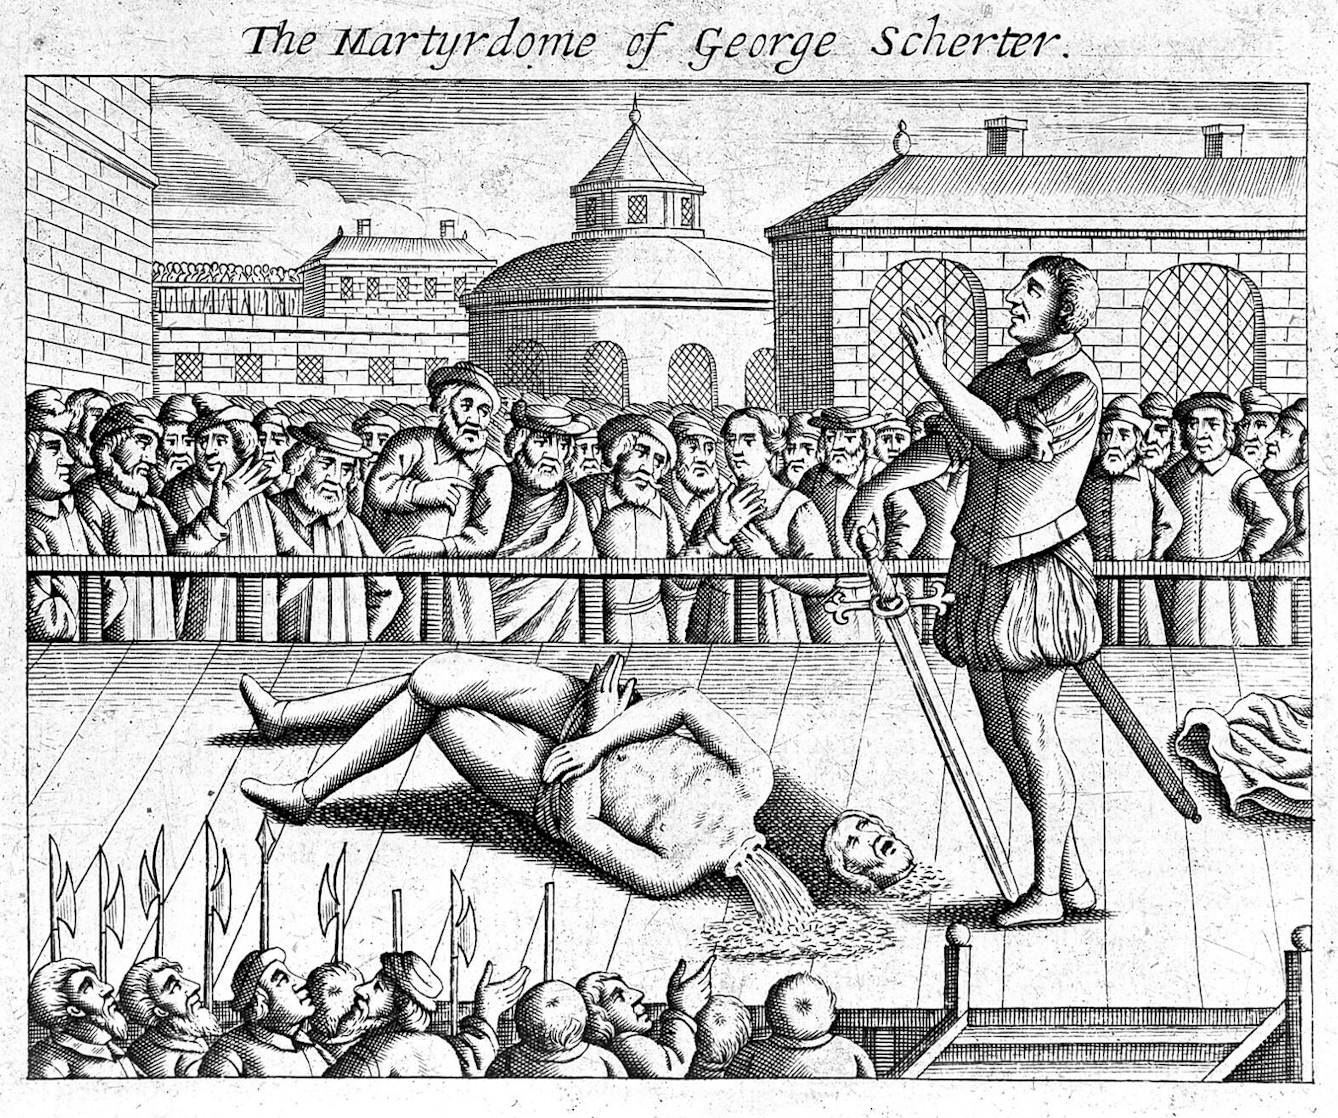 Black and white etching showing a person laying on scaffold boards wearing only breeches with their head severed and laying in the opposite direction to the body, which has blood pouring from the neck. The executioner, with rolled up sleeves and a sword resting on the ground, has their left hand raised to the crowd, who appear shocked. 